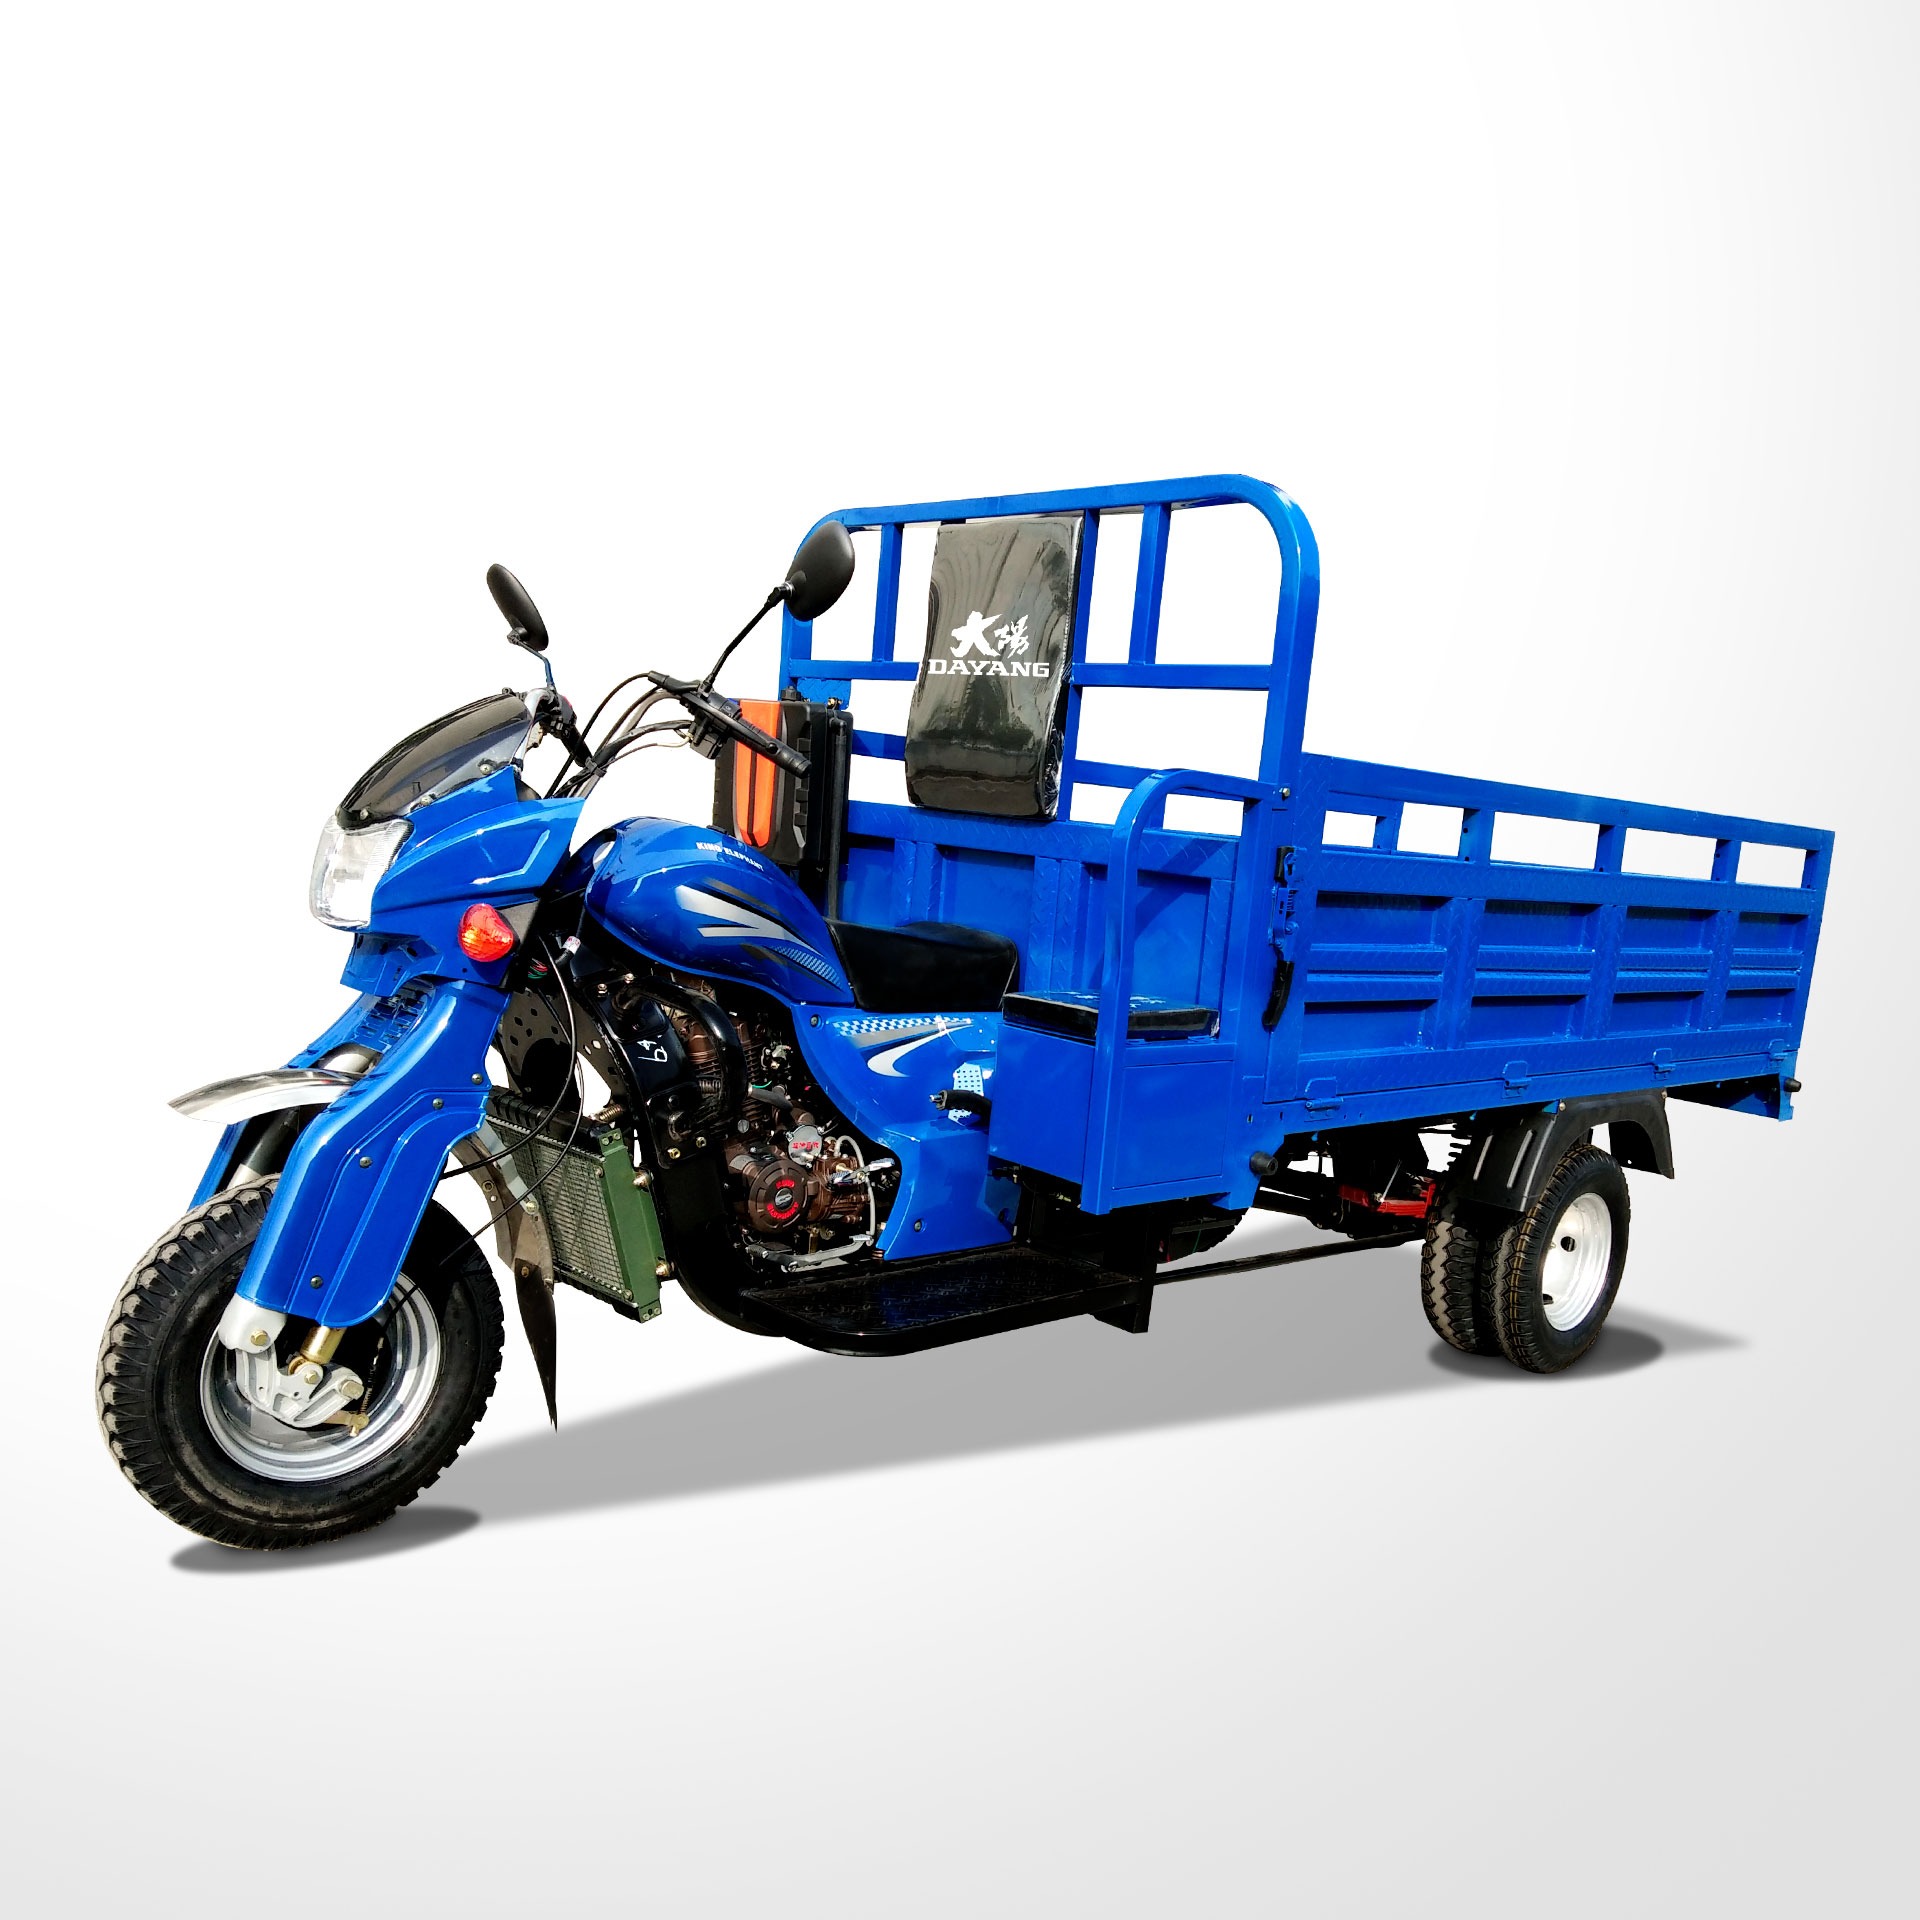 DAYANG Moped Long Range Worksman egypt motor tricycle petrol gasoline motorized cargo tricycles